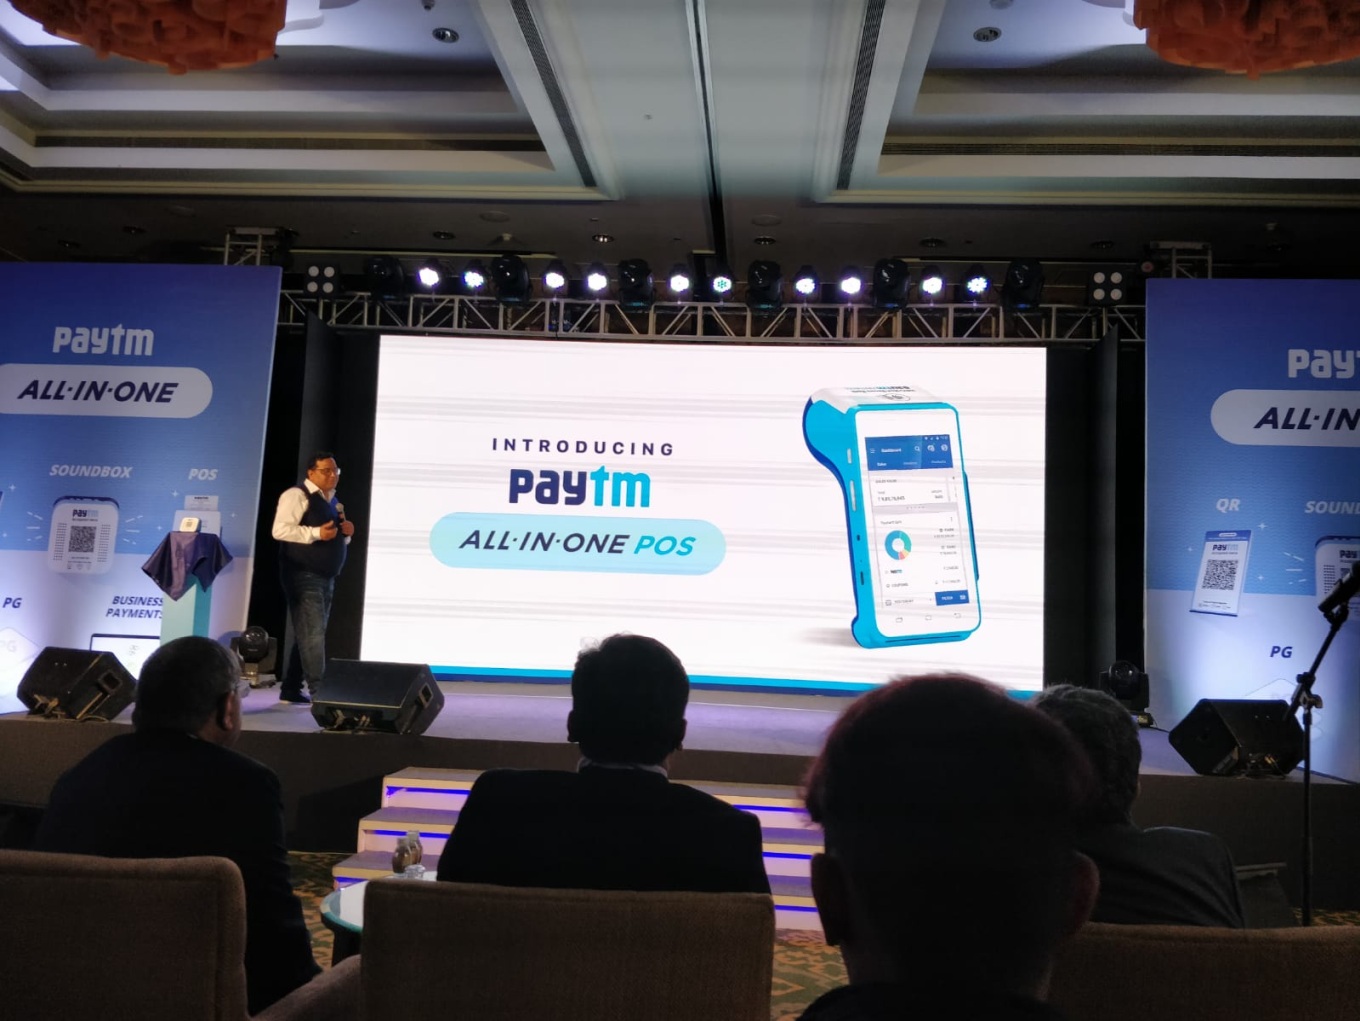 paytm all-in-one pos device